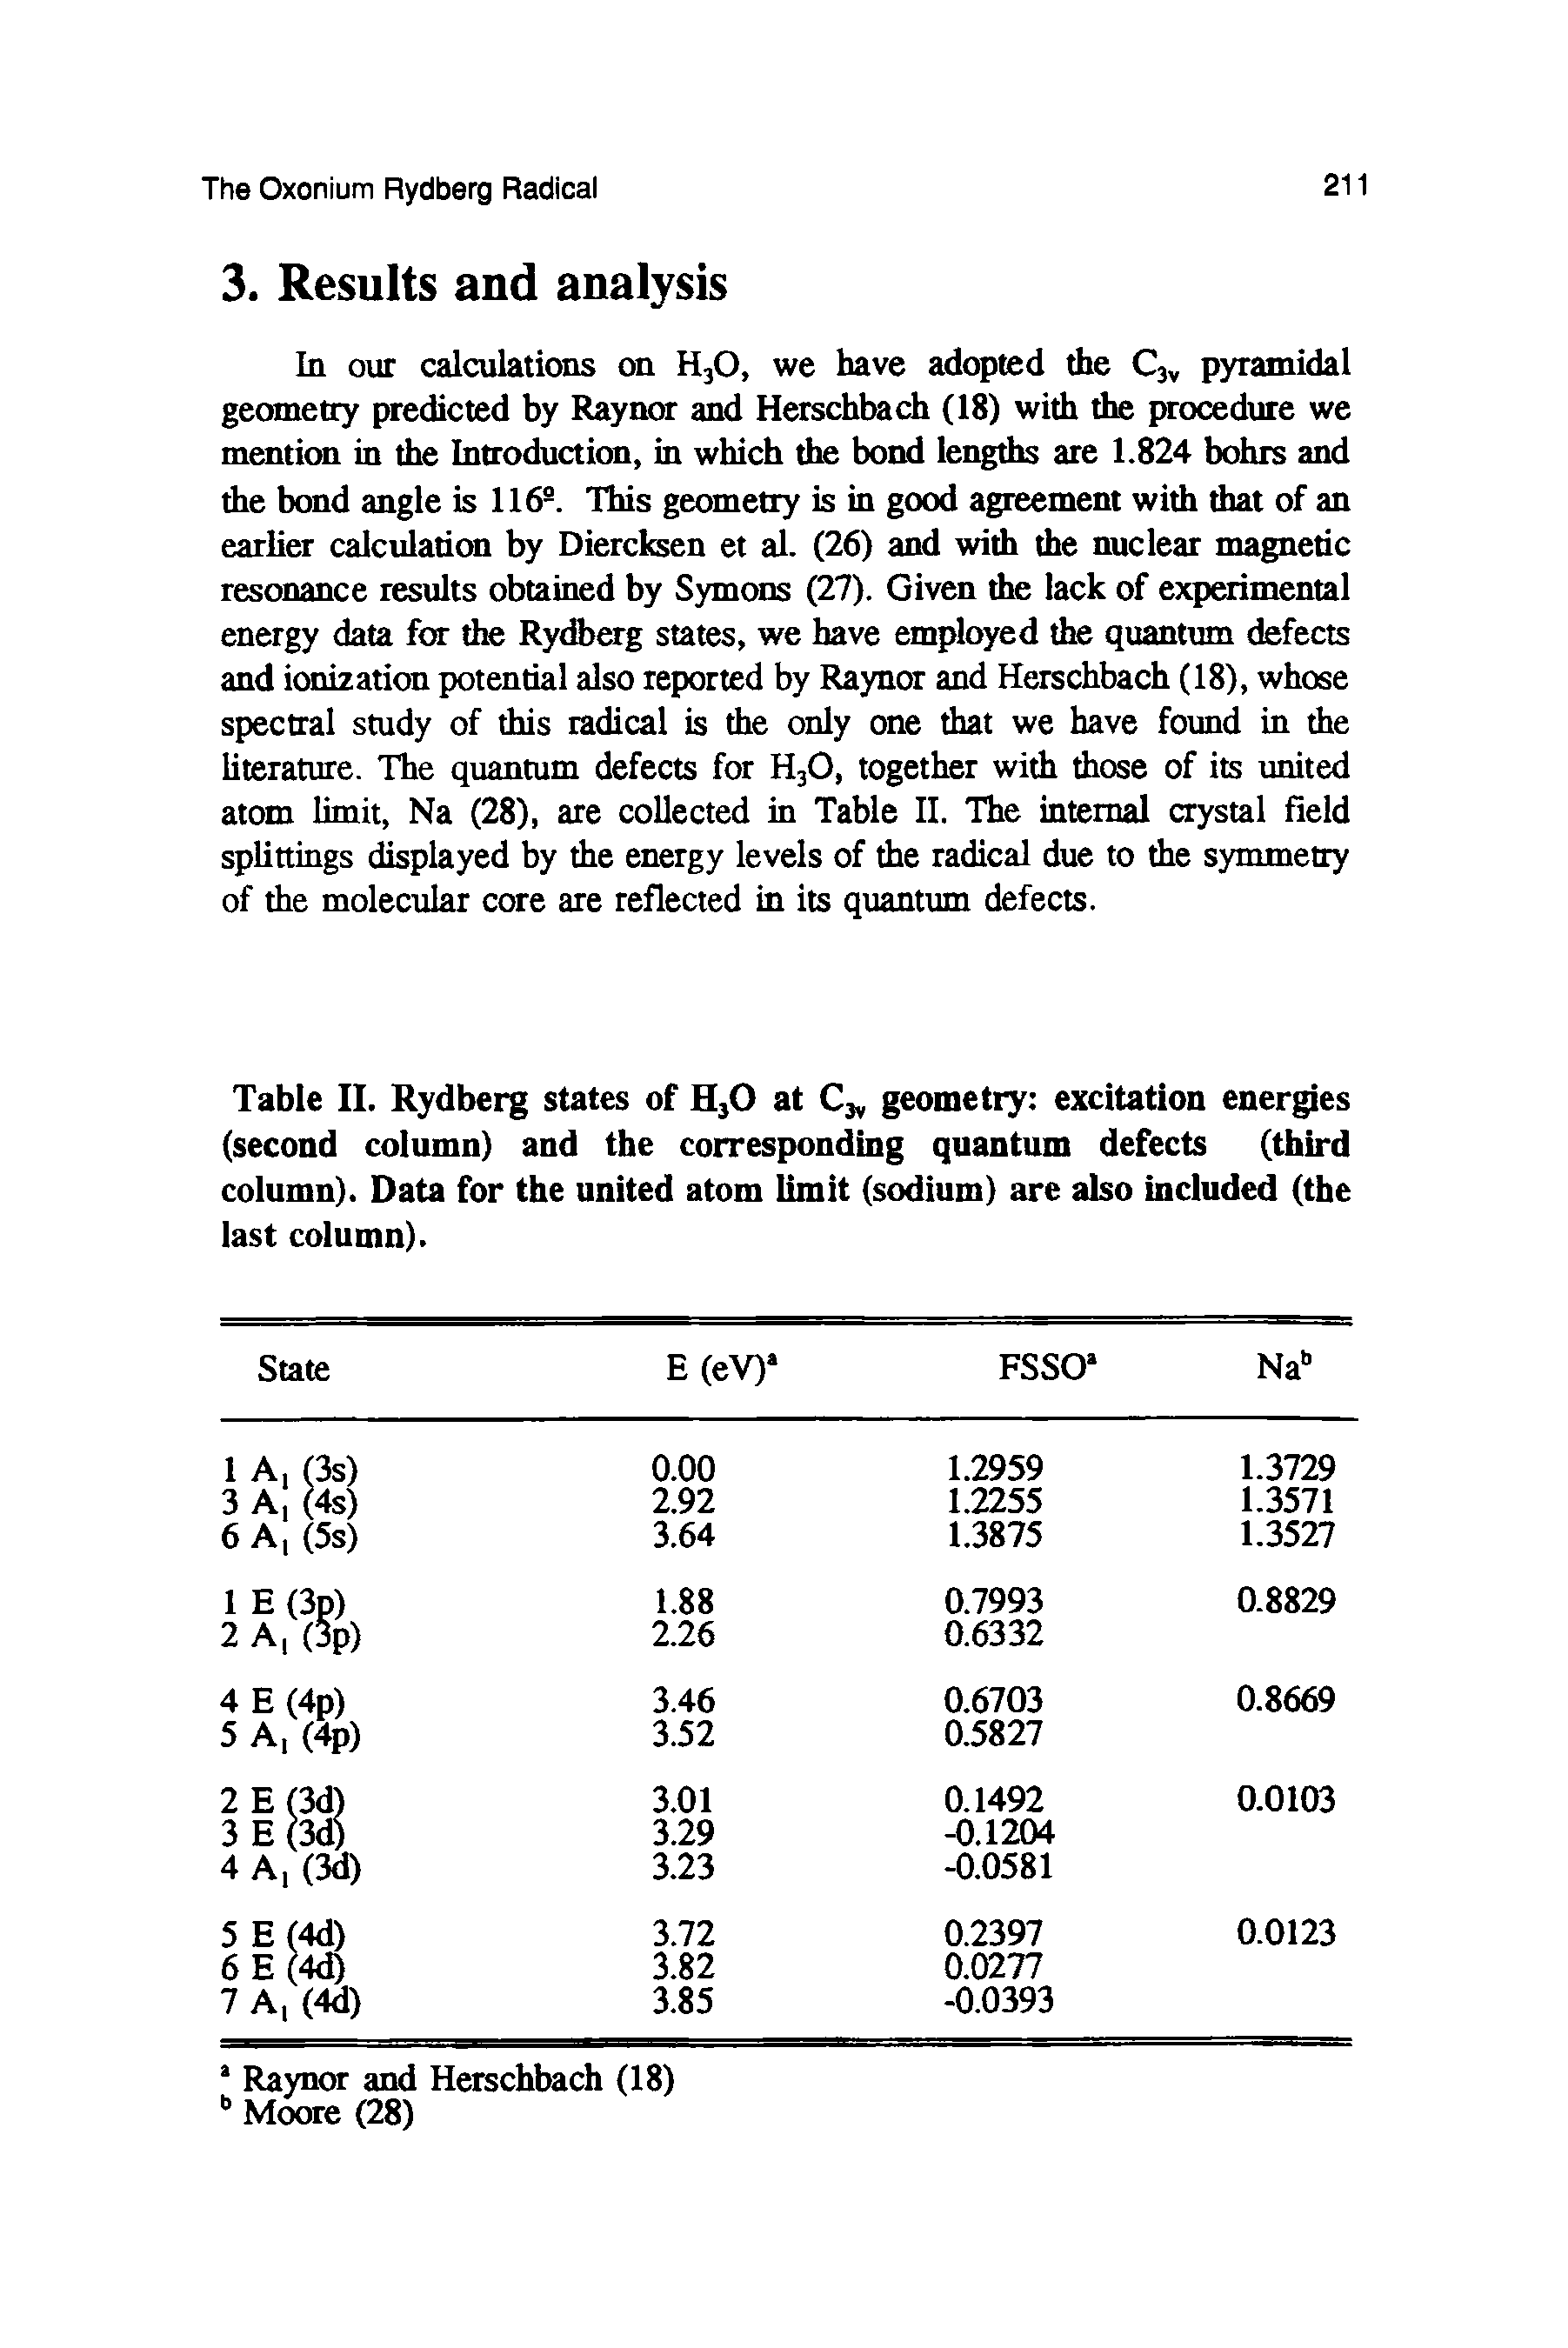 Table II. Rydberg states of H30 at C3y geometry excitation energies (second column) and the corresponding quantum defects (third column). Data for the united atom limit (sodium) are also included (the last column).